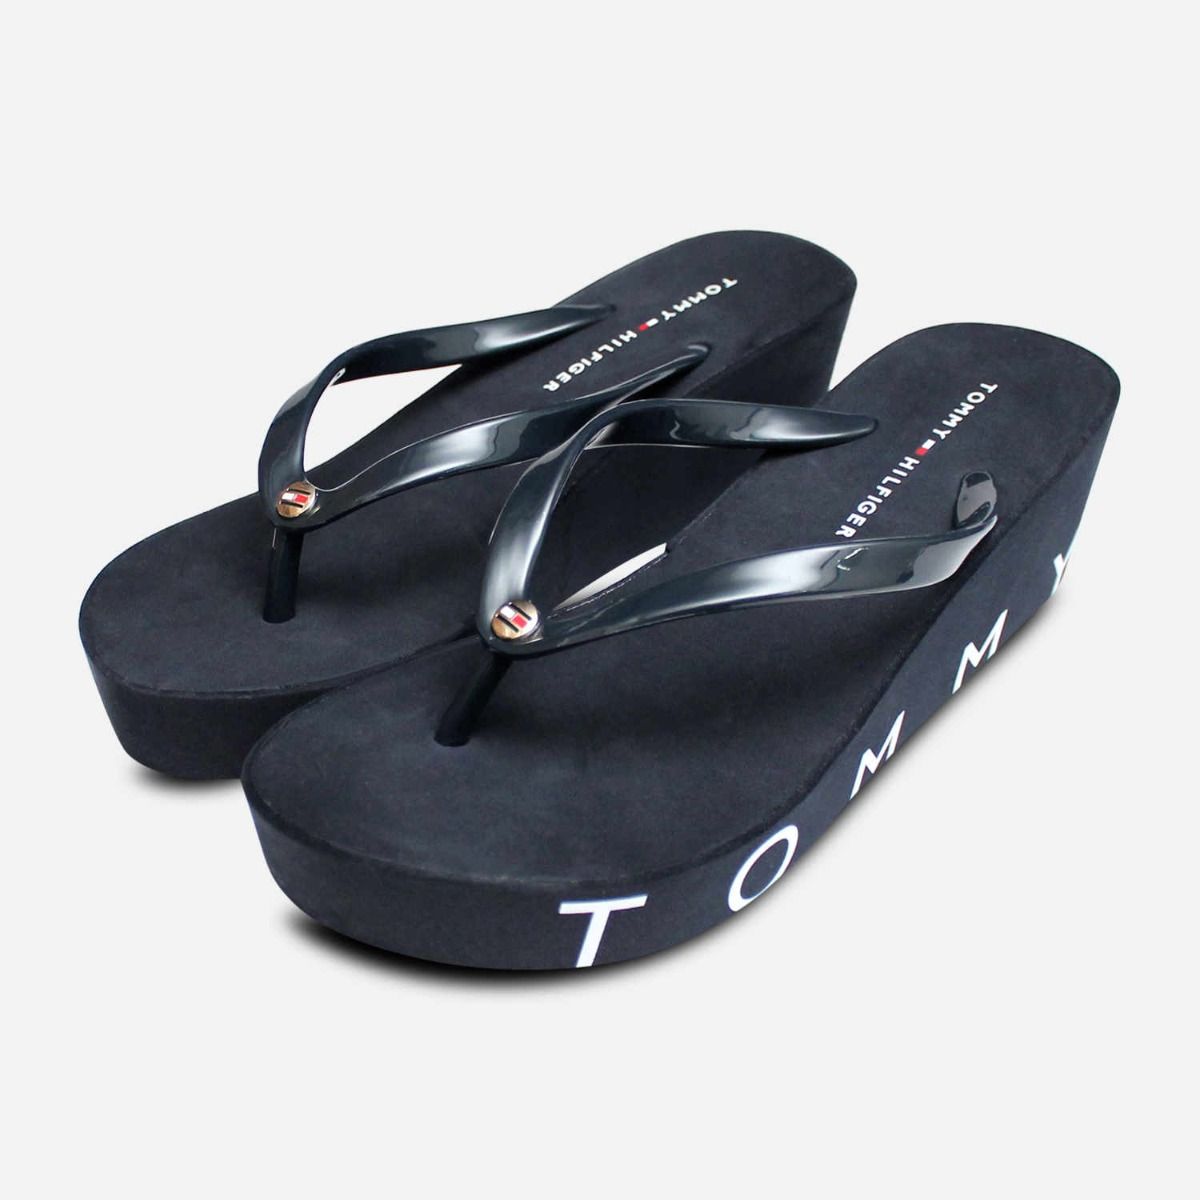 tommy hilfiger beach shoes